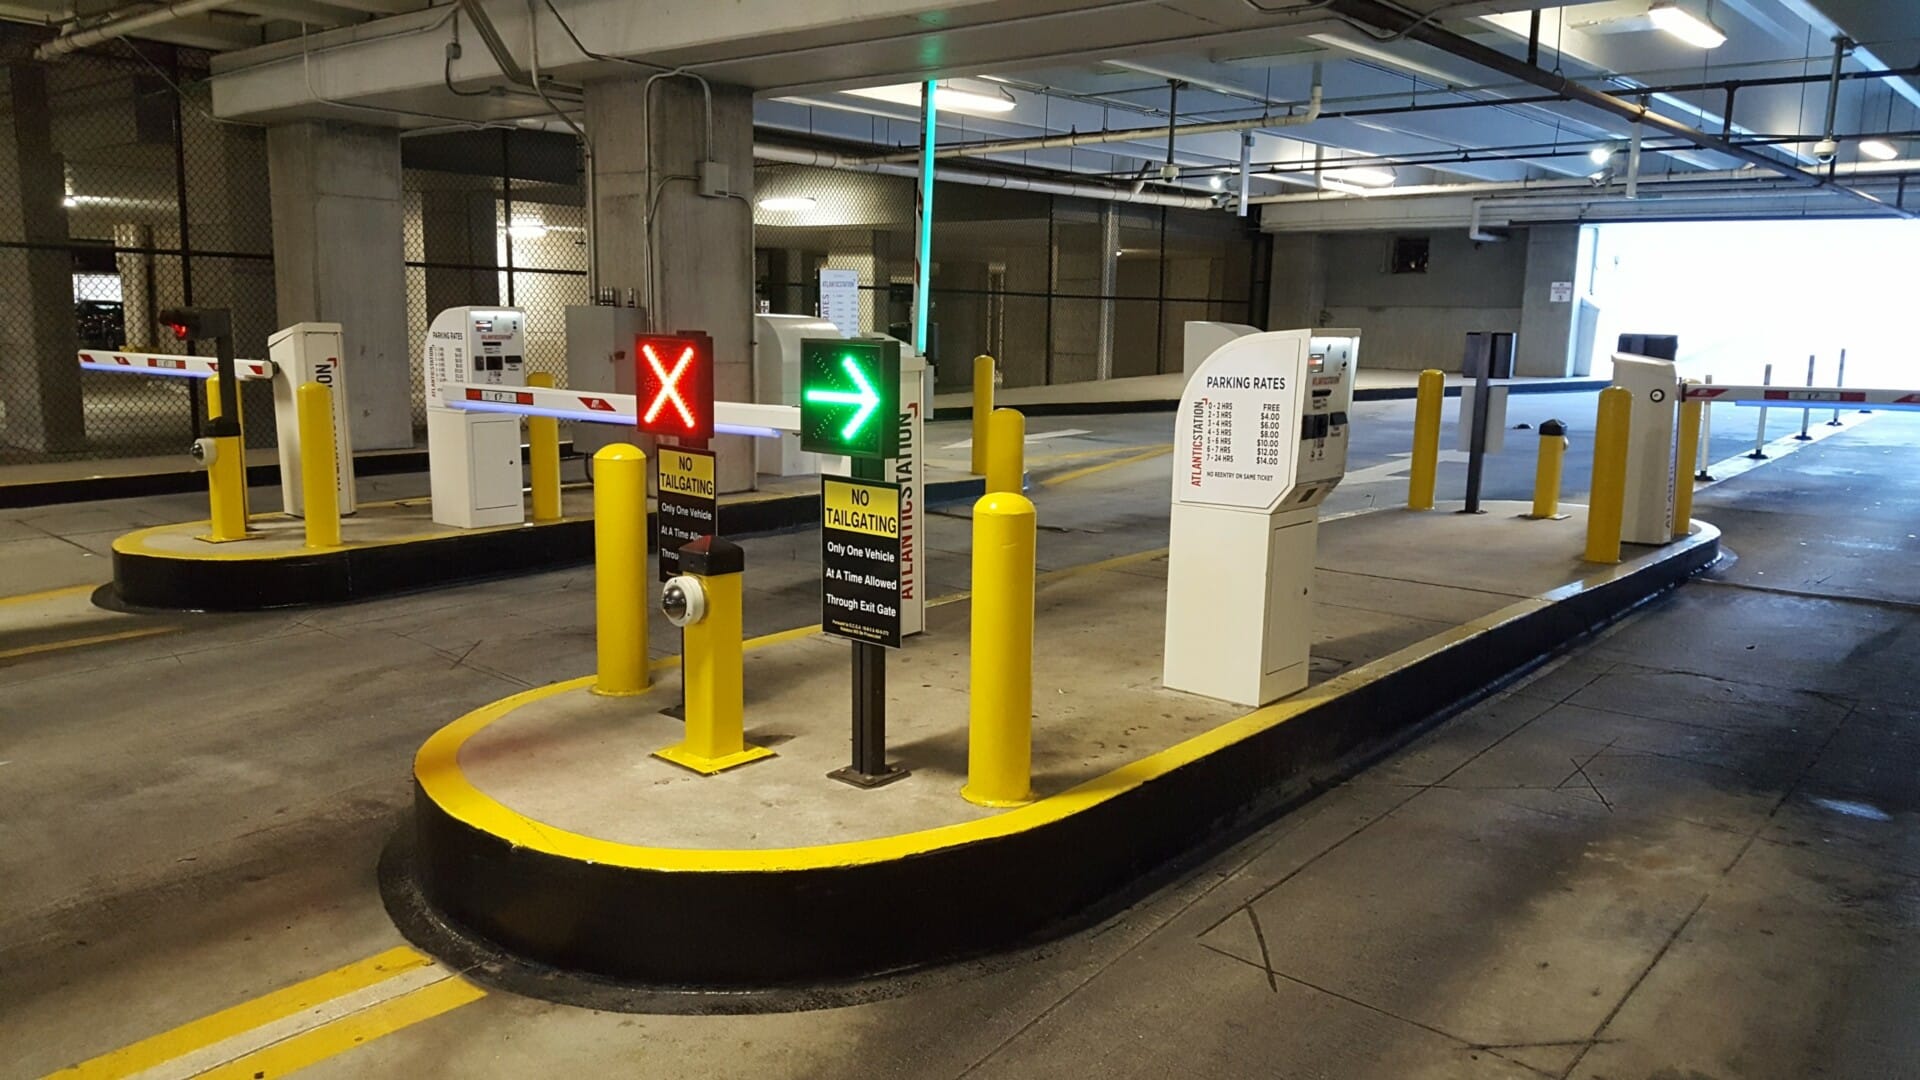 Controlled access with direction signs lit up for safe and secure parking.